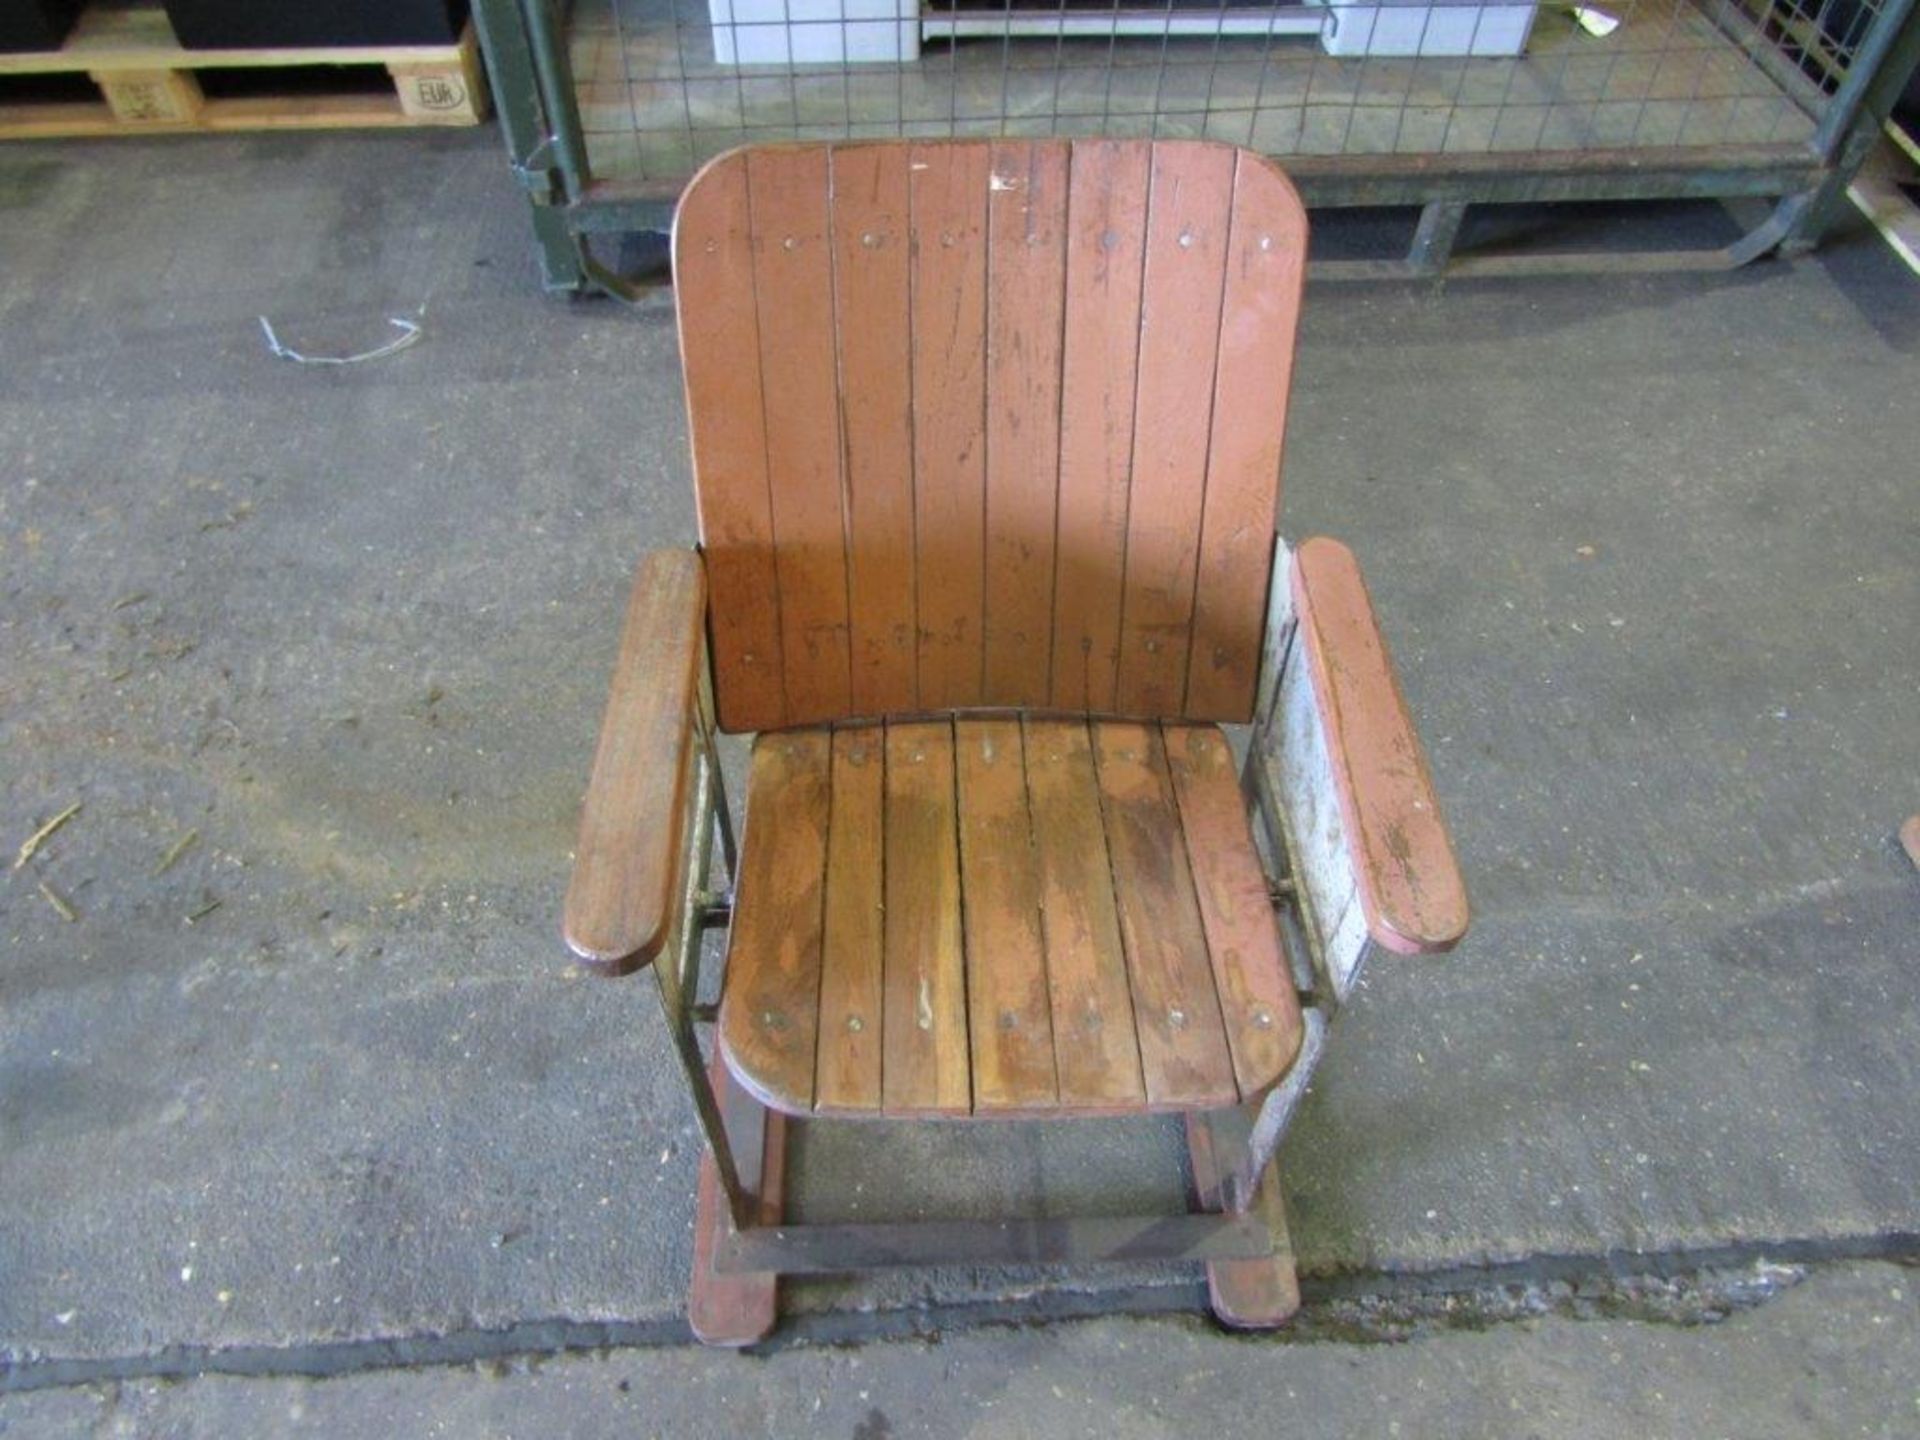 You are bidding on a Unique Vintage Cinema Seat - Image 2 of 7